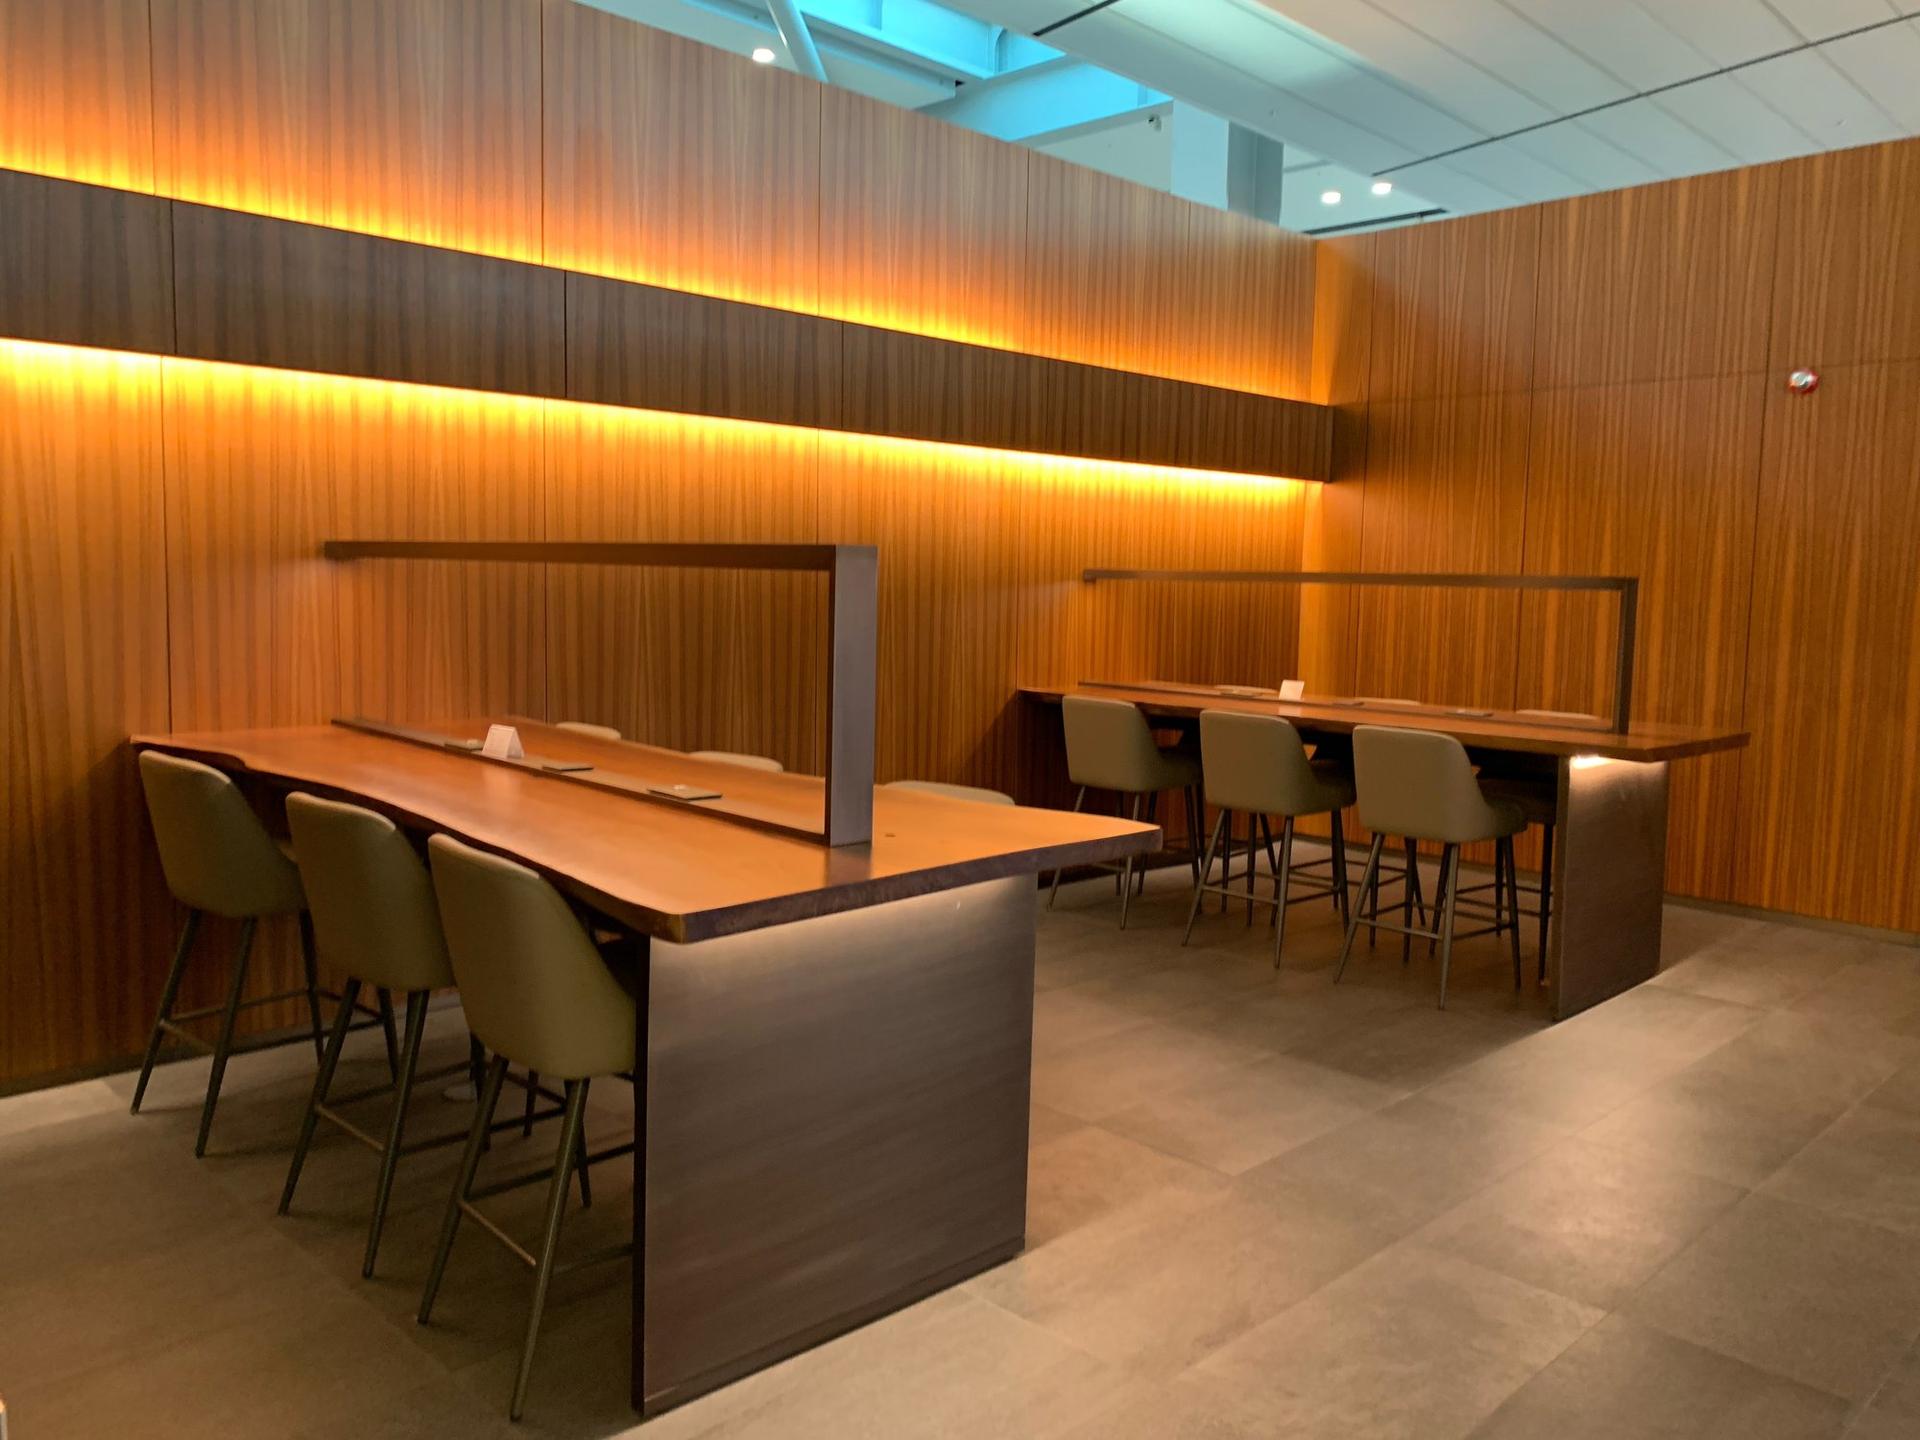 Asiana Airlines Business Suite Lounge image 3 of 15